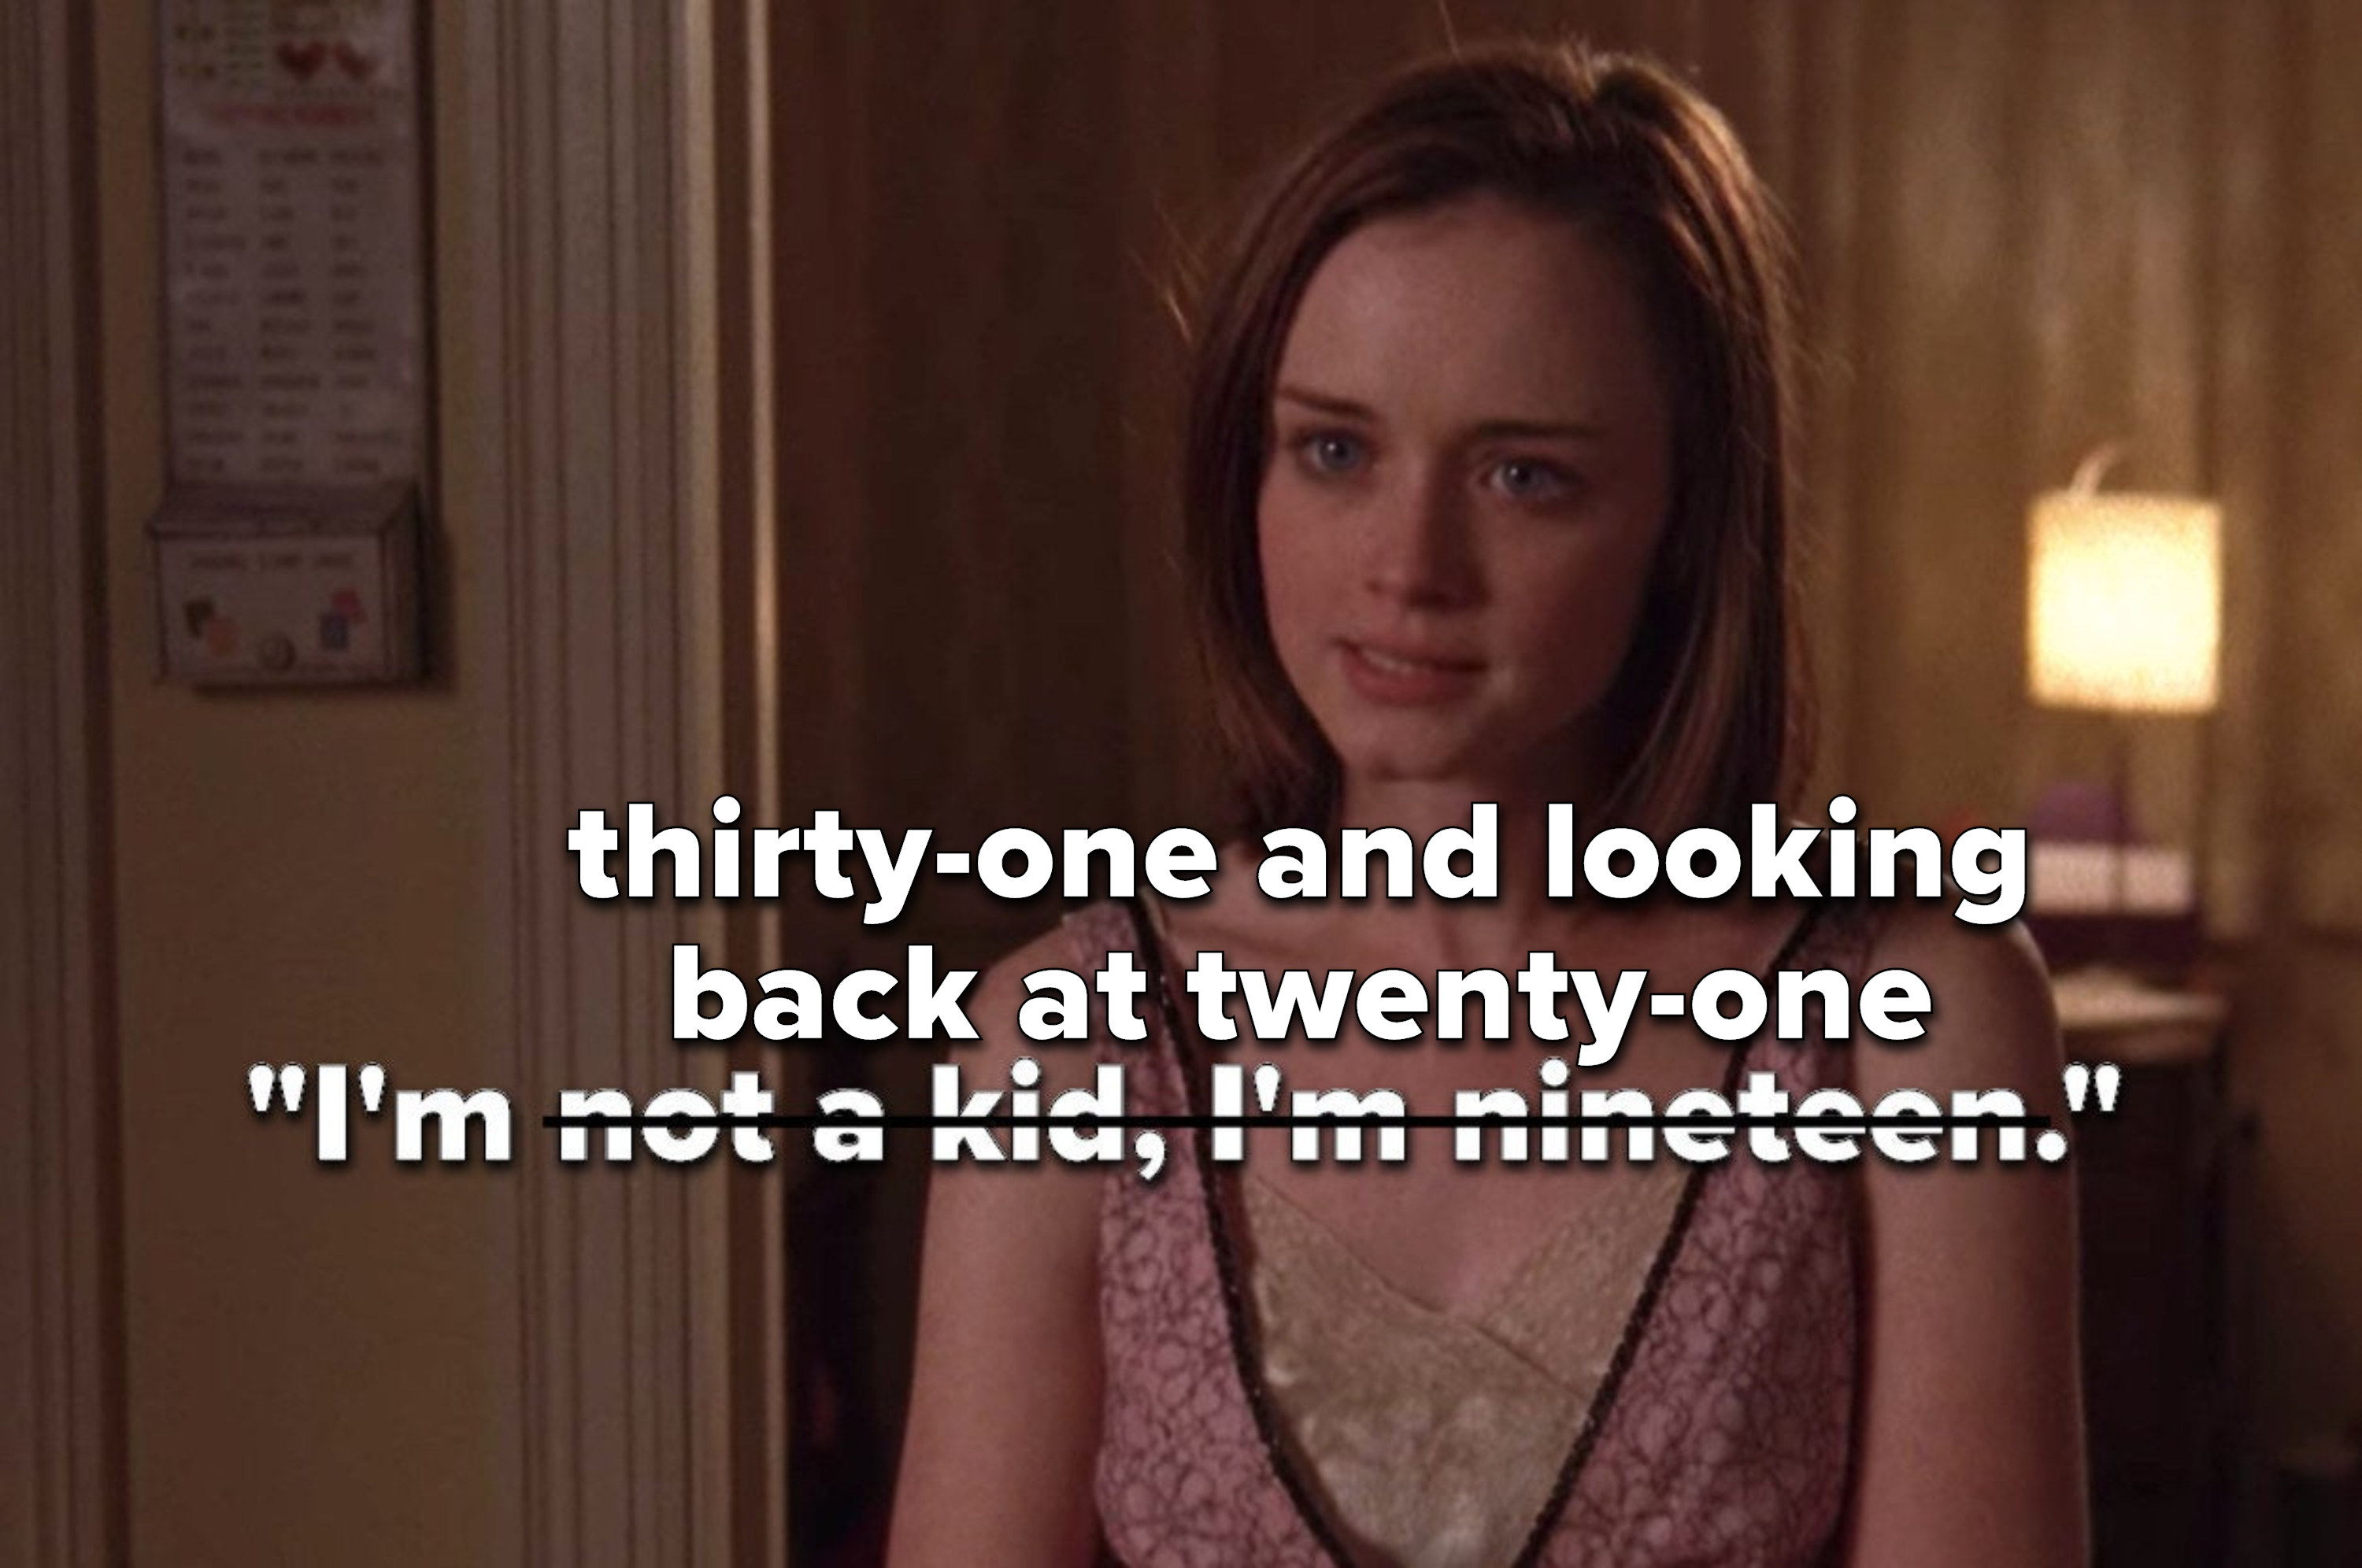 Rory from &quot;Gilmore Girls&quot; saying, &quot;I&#x27;m not a kid, I&#x27;m nineteen,&quot; crossed out to say, &quot;I&#x27;m thirty-one and looking back at twenty-one&quot;